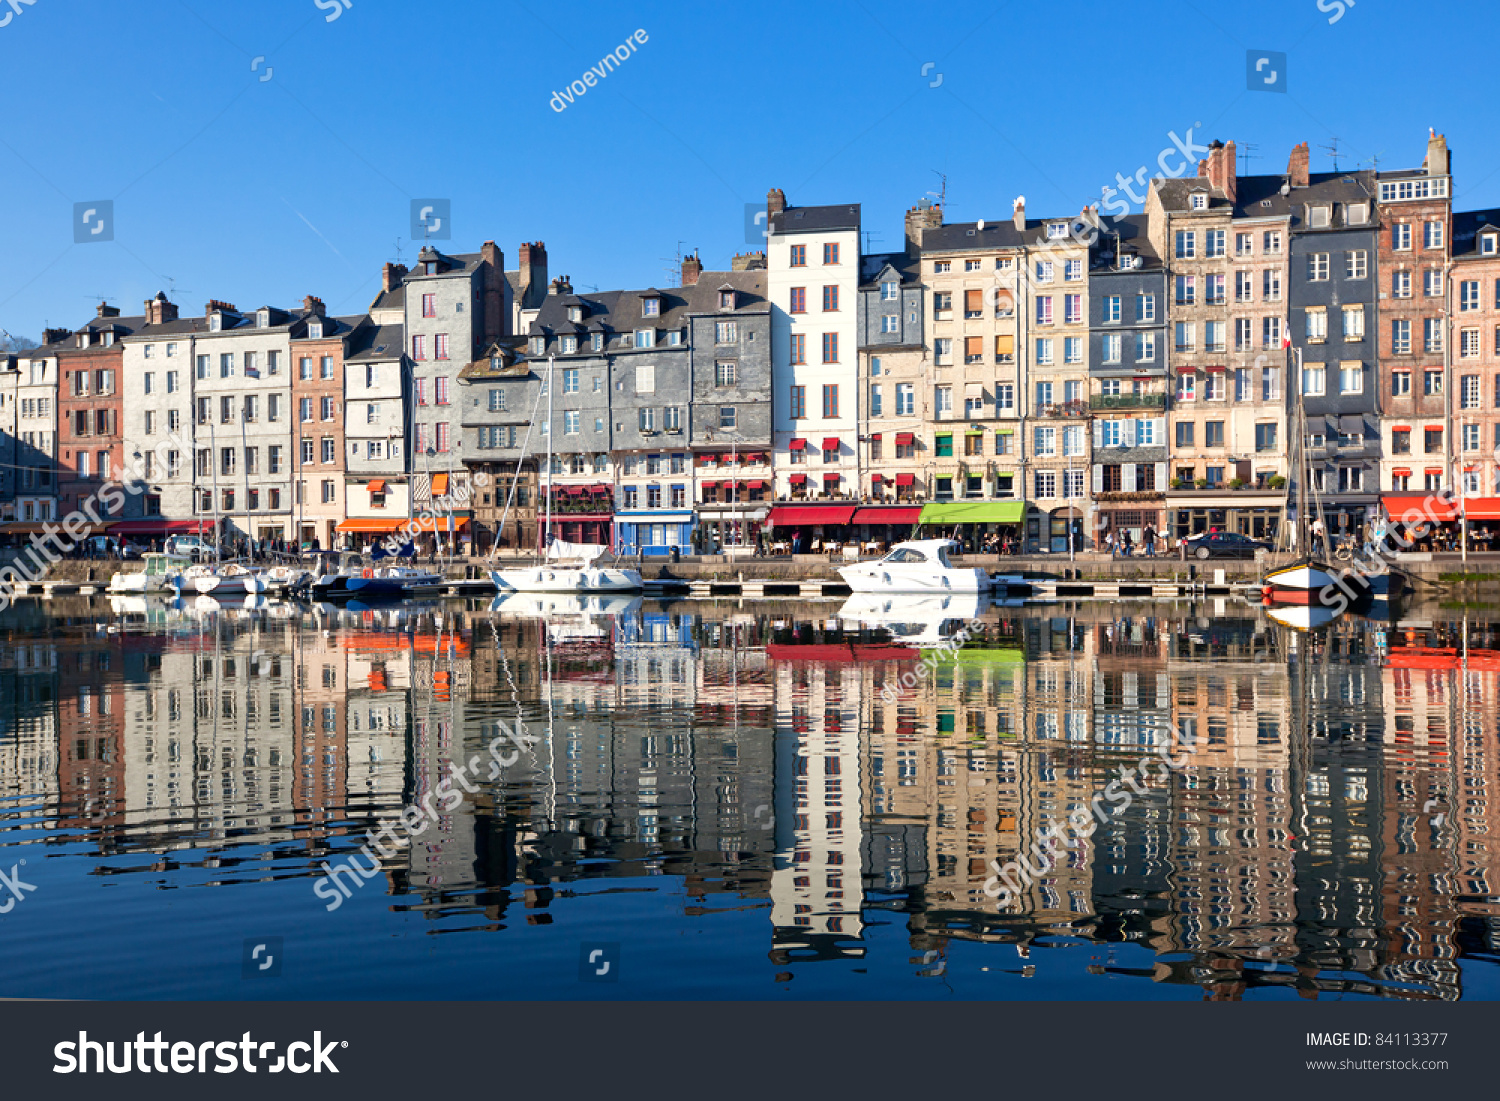 Honfleur Harbour In Normandy, France. Color Houses And Their Reflection ...